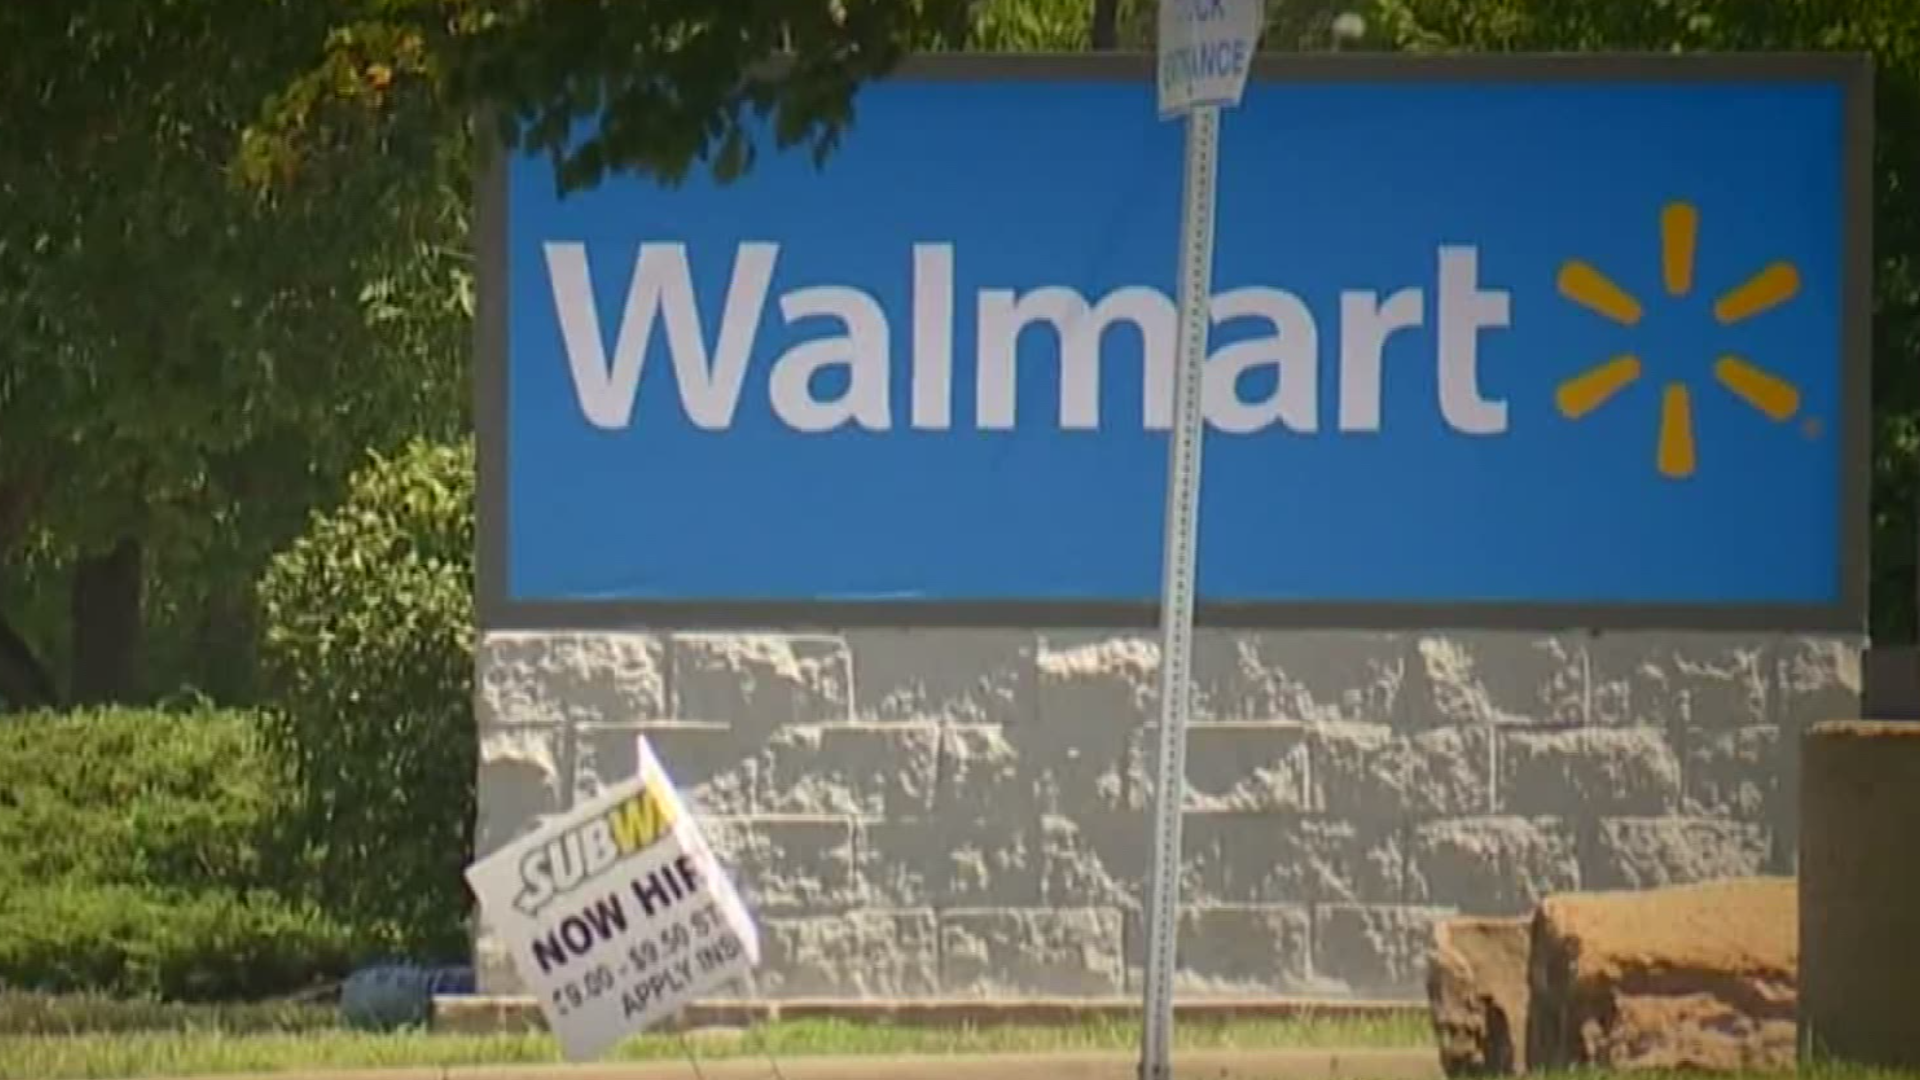 One man took it upon himself to write a letter to the CEO of Walmart in effort to ask for more security at a Gwinnett Walmart.